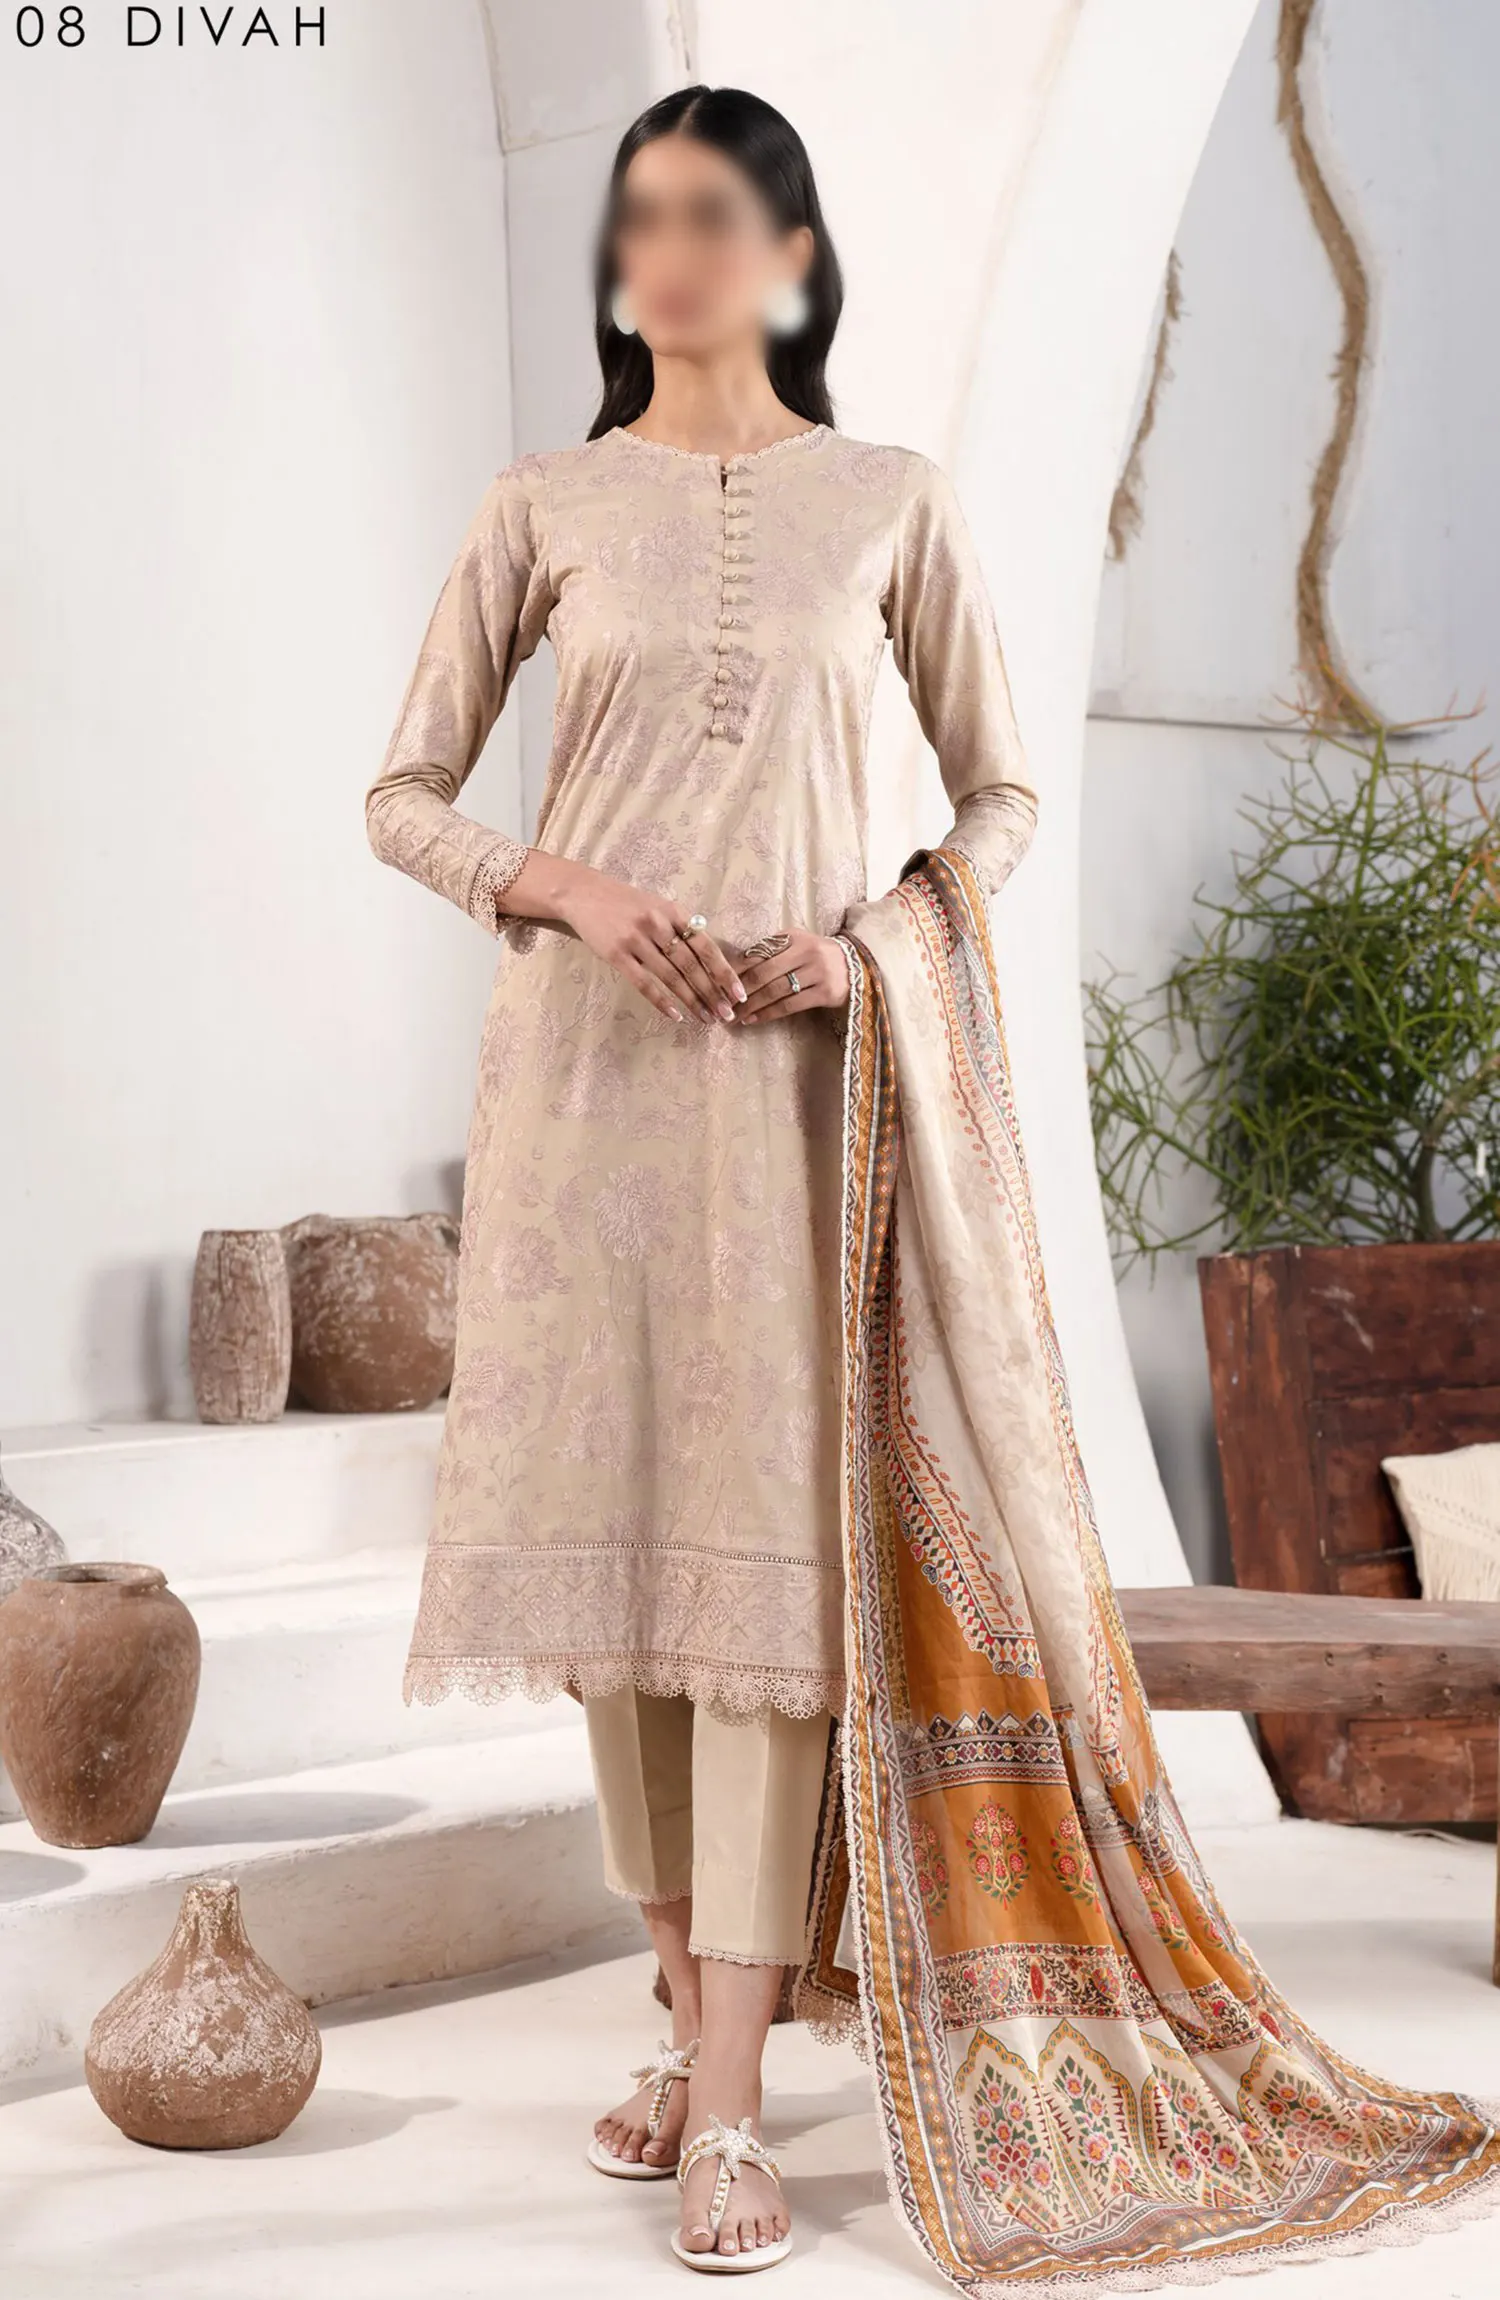 Zarif Eid Lawn Embroidered and Printed Edit - ZL 08 DIVAH